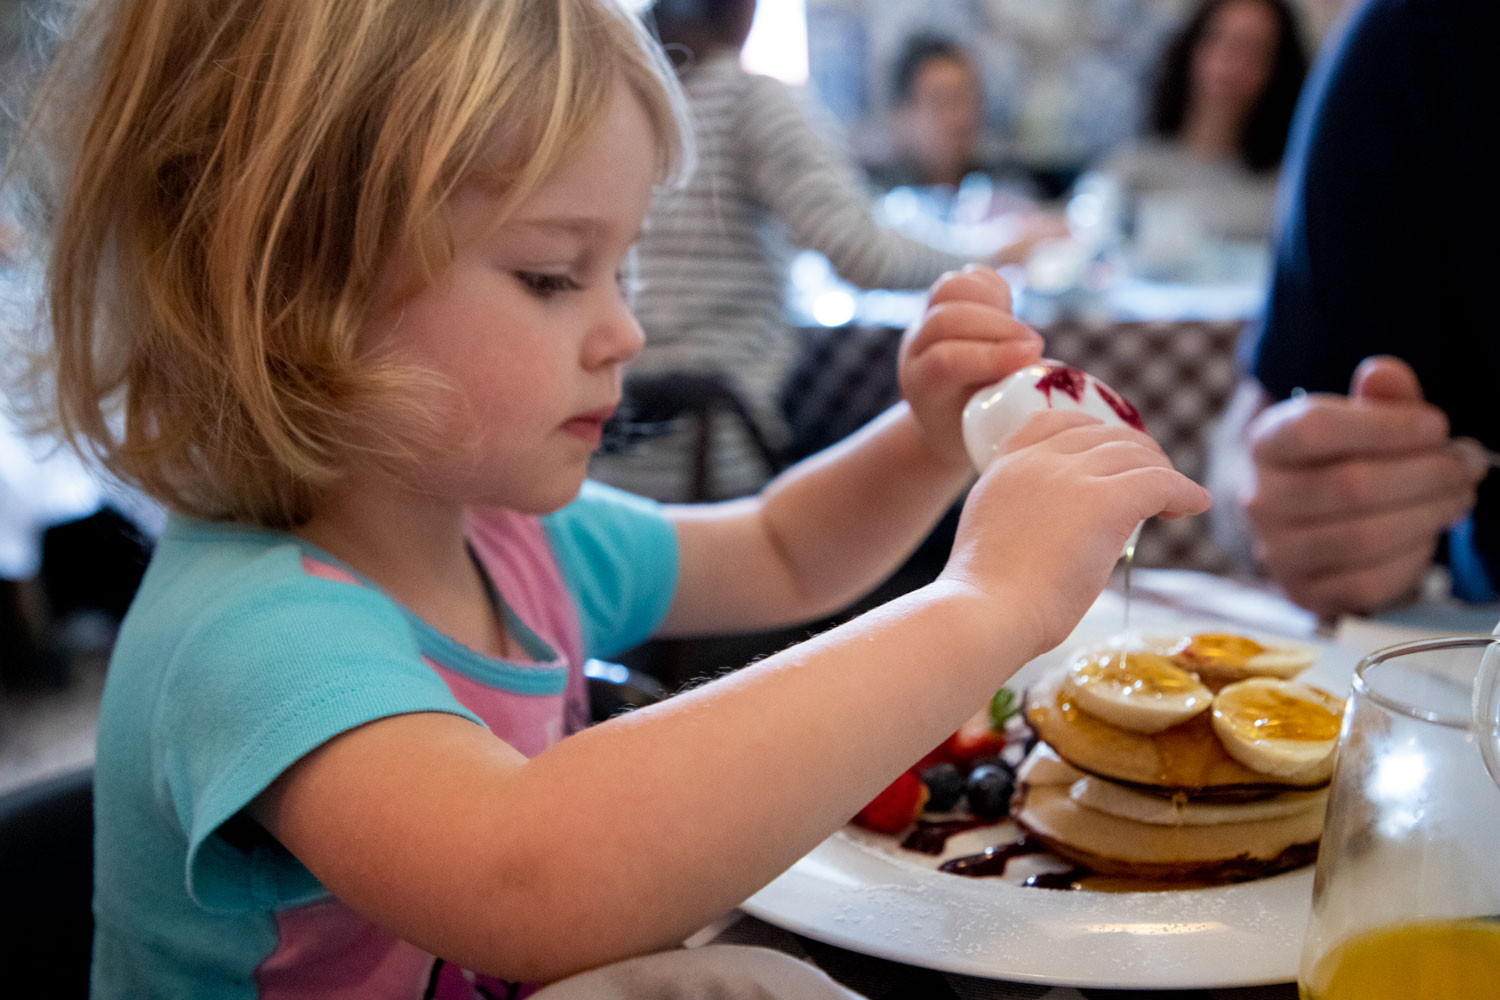 3 year old puts syrup on pancakes during breakfast | Lisbon with kids